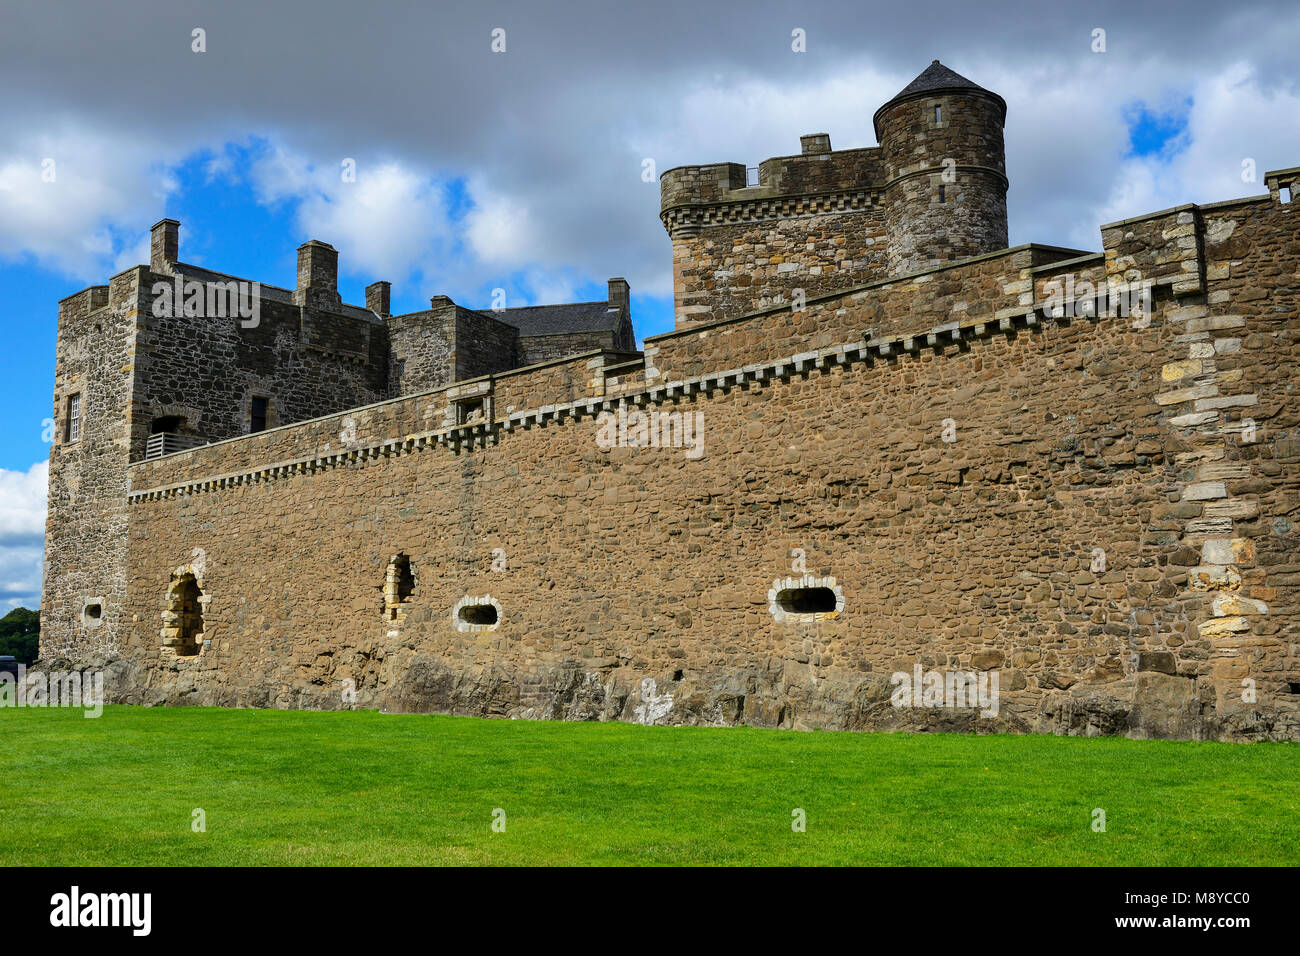 Fortress Stock Photos - 1,510,404 Images